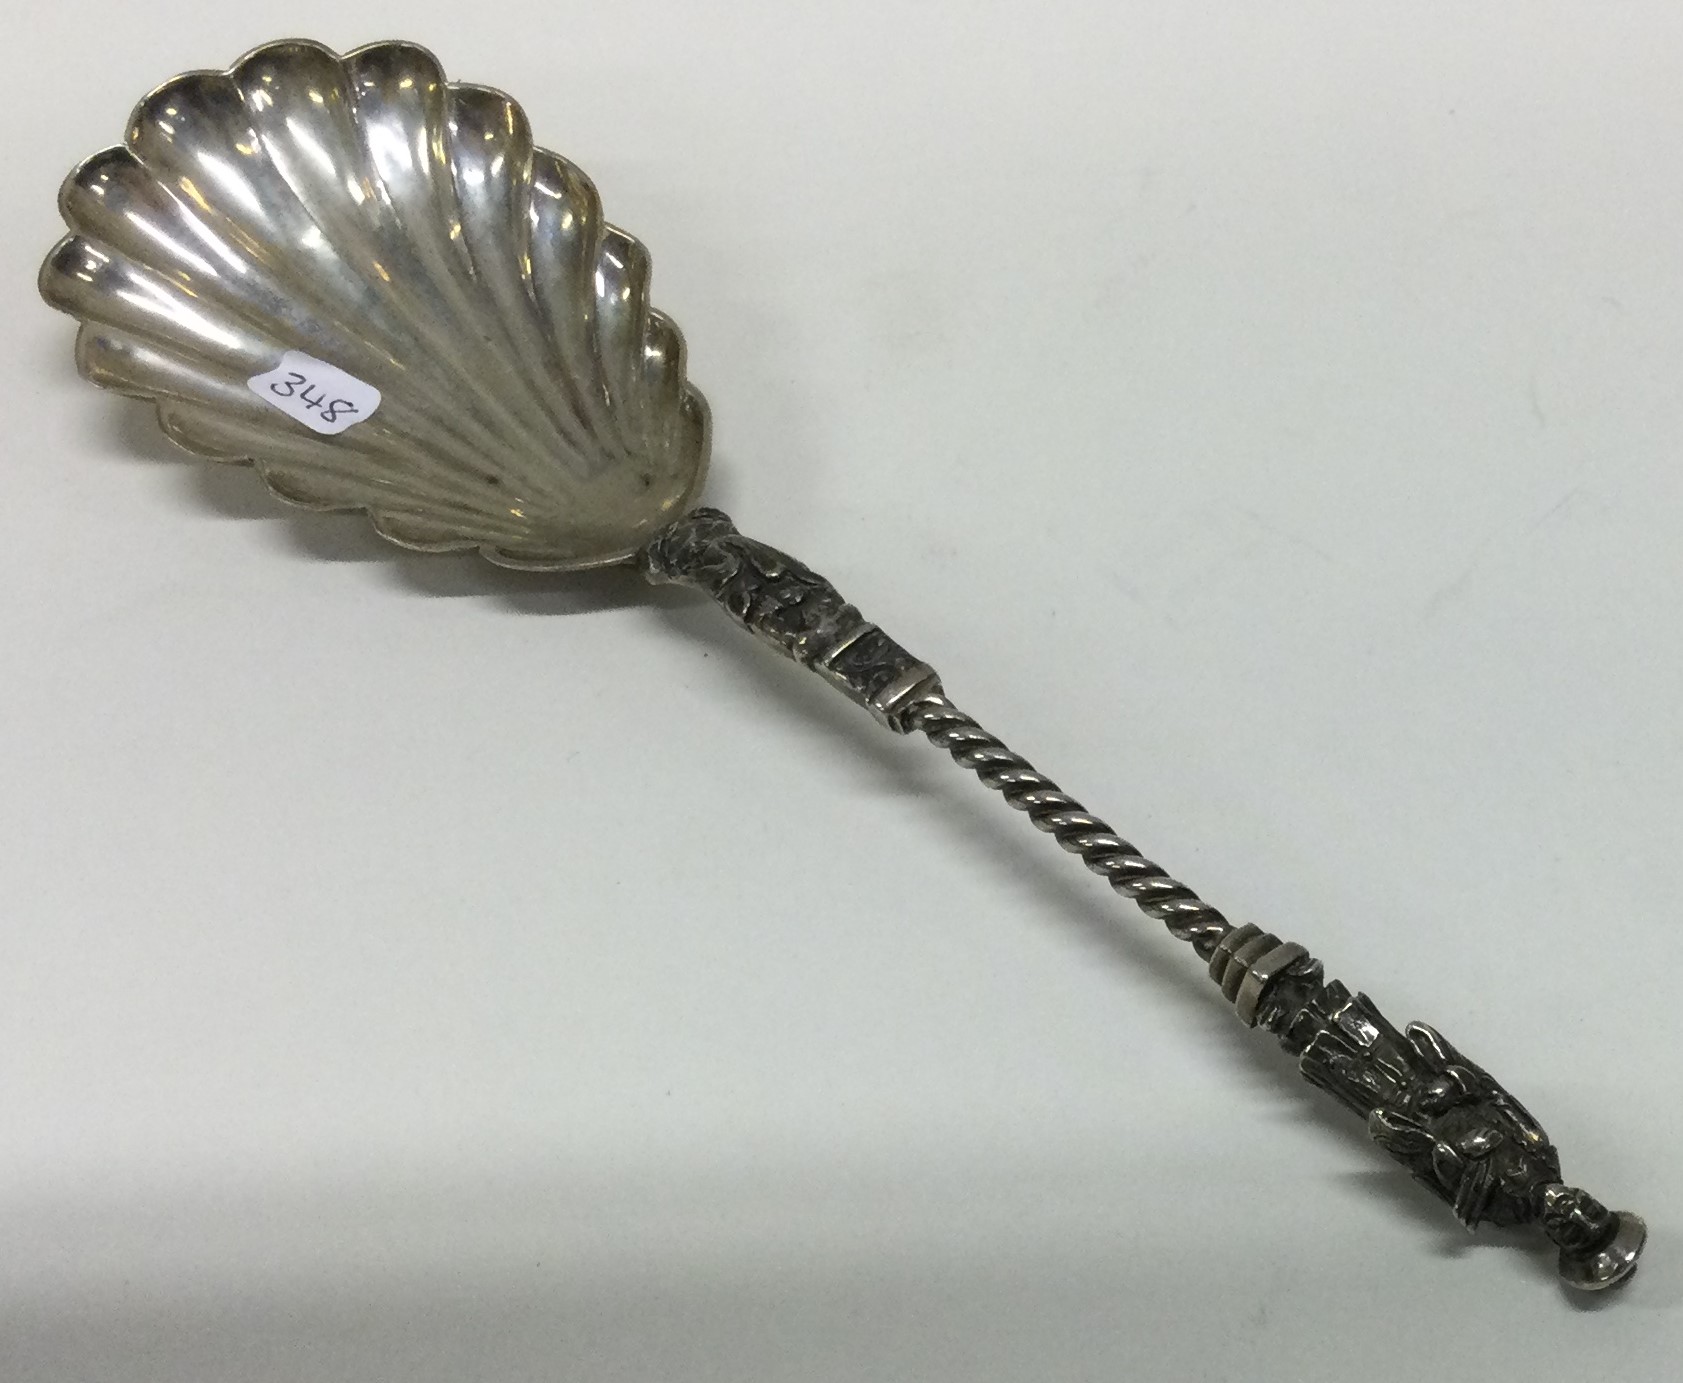 WANG HING: A 19th Century Chinese export silver spoon with Emperor decoration.